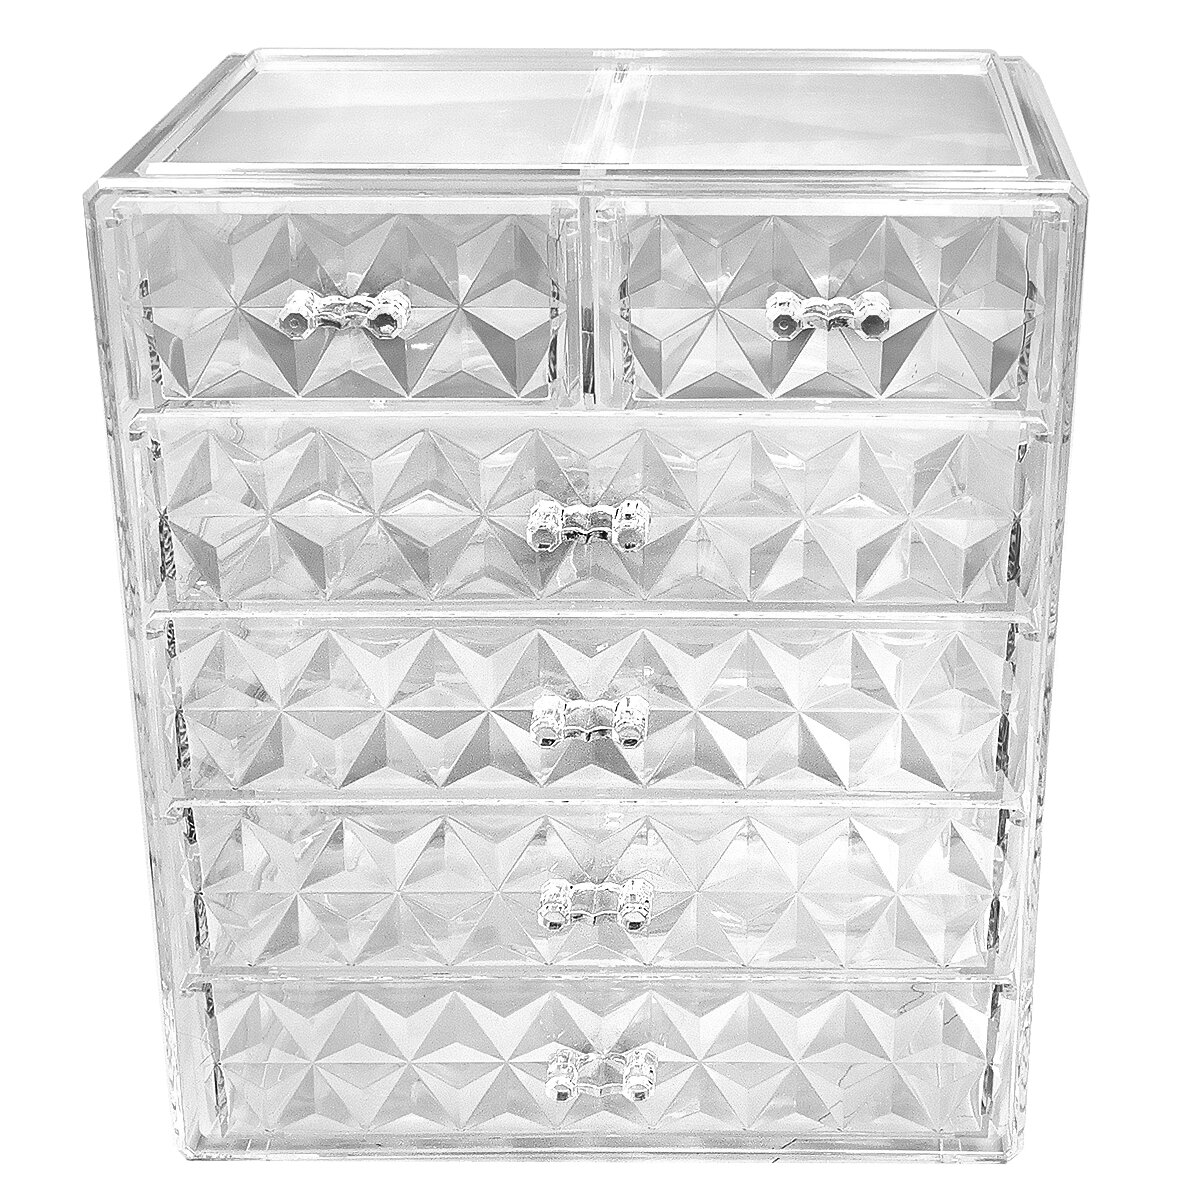 BINO THE MANHATTAN SERIES Acrylic Makeup Drawer Organizer-3 Large 2 Small  Drawer, Clear Beauty Organizers and Storage, Cosmetic & Makeup Drawer, Home Organization